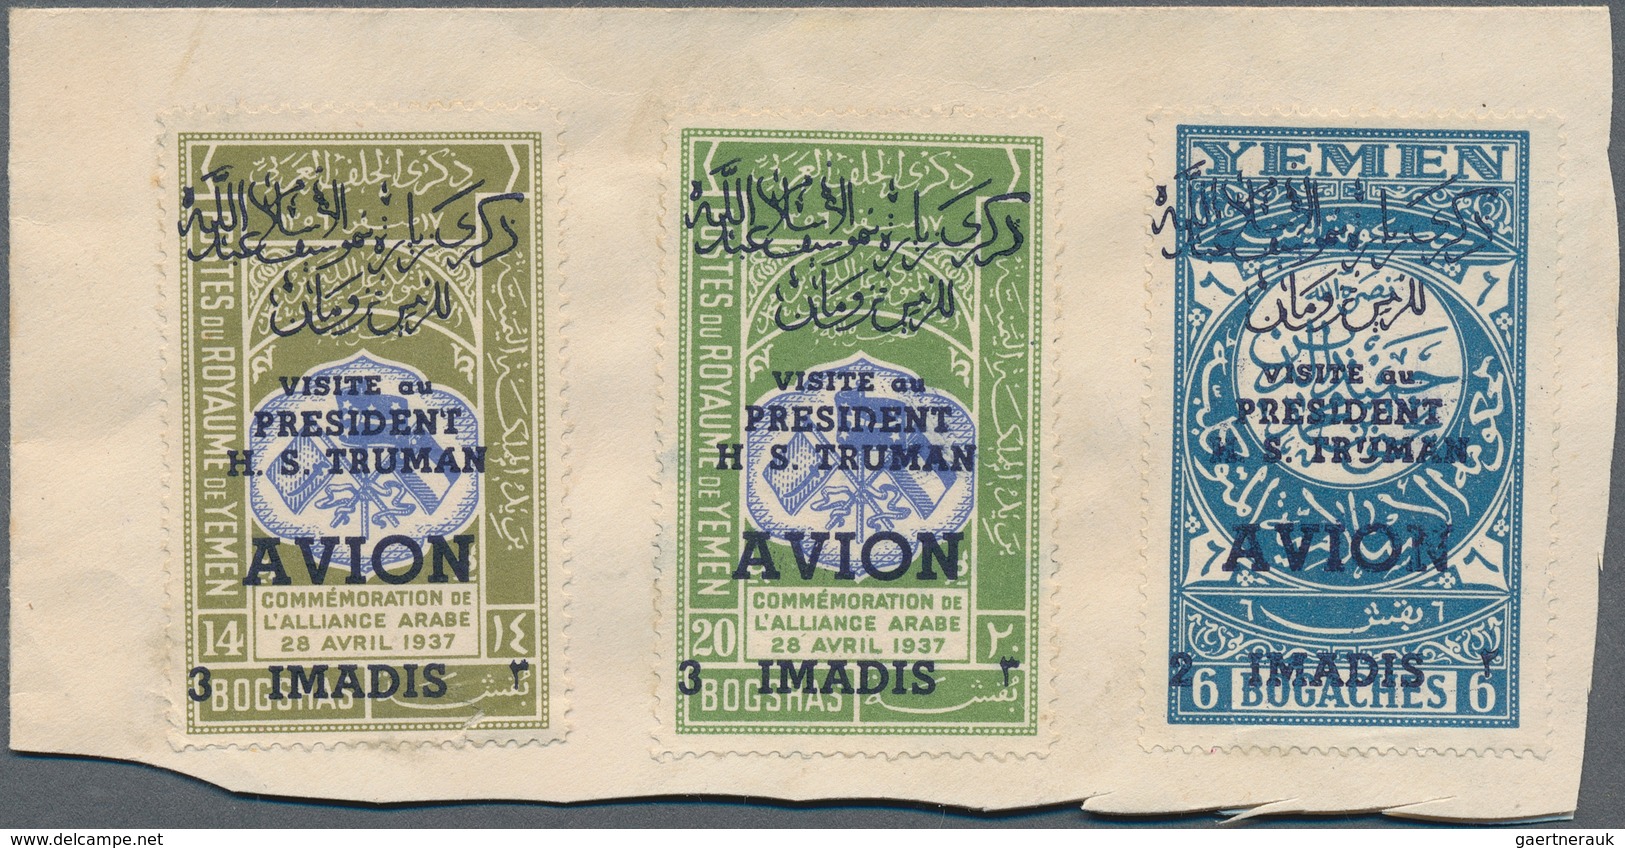 23012 Jemen: 1948 Group Of 24 Unissued Stamps, 13 Of Them Optd. "ROI IMAM AHMED-1948" Incl. 10 For Airmail - Yémen